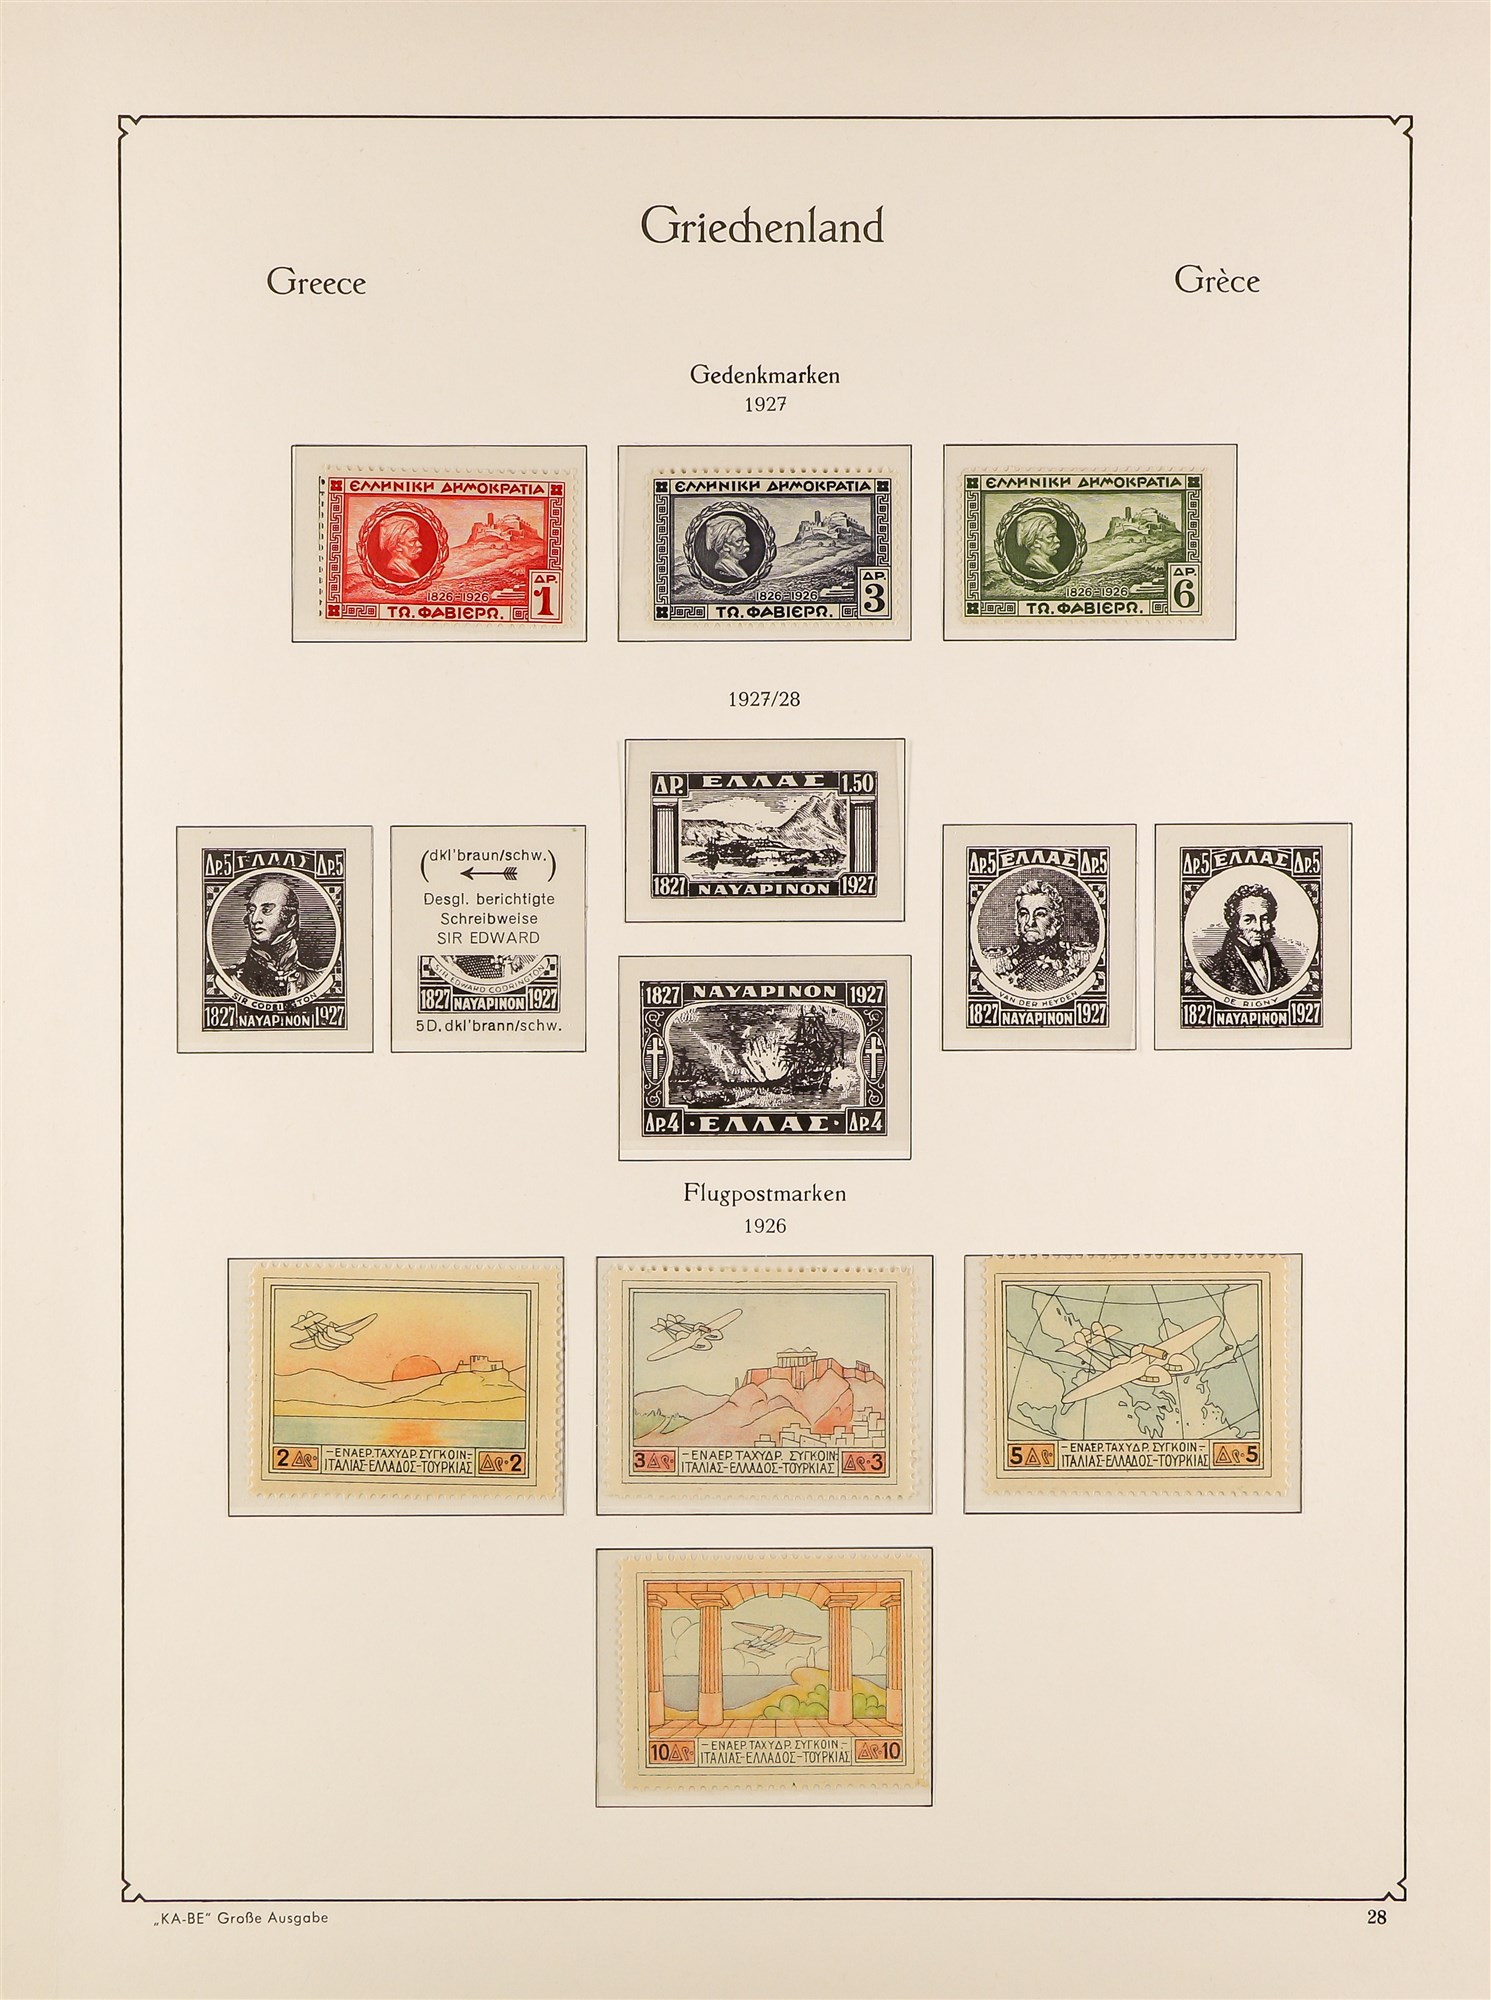 GREECE 1901 - 1930 MINT COLLECTION of 200+ stamps on Ka-Be hingeless album pages, comprehensive incl - Image 13 of 14